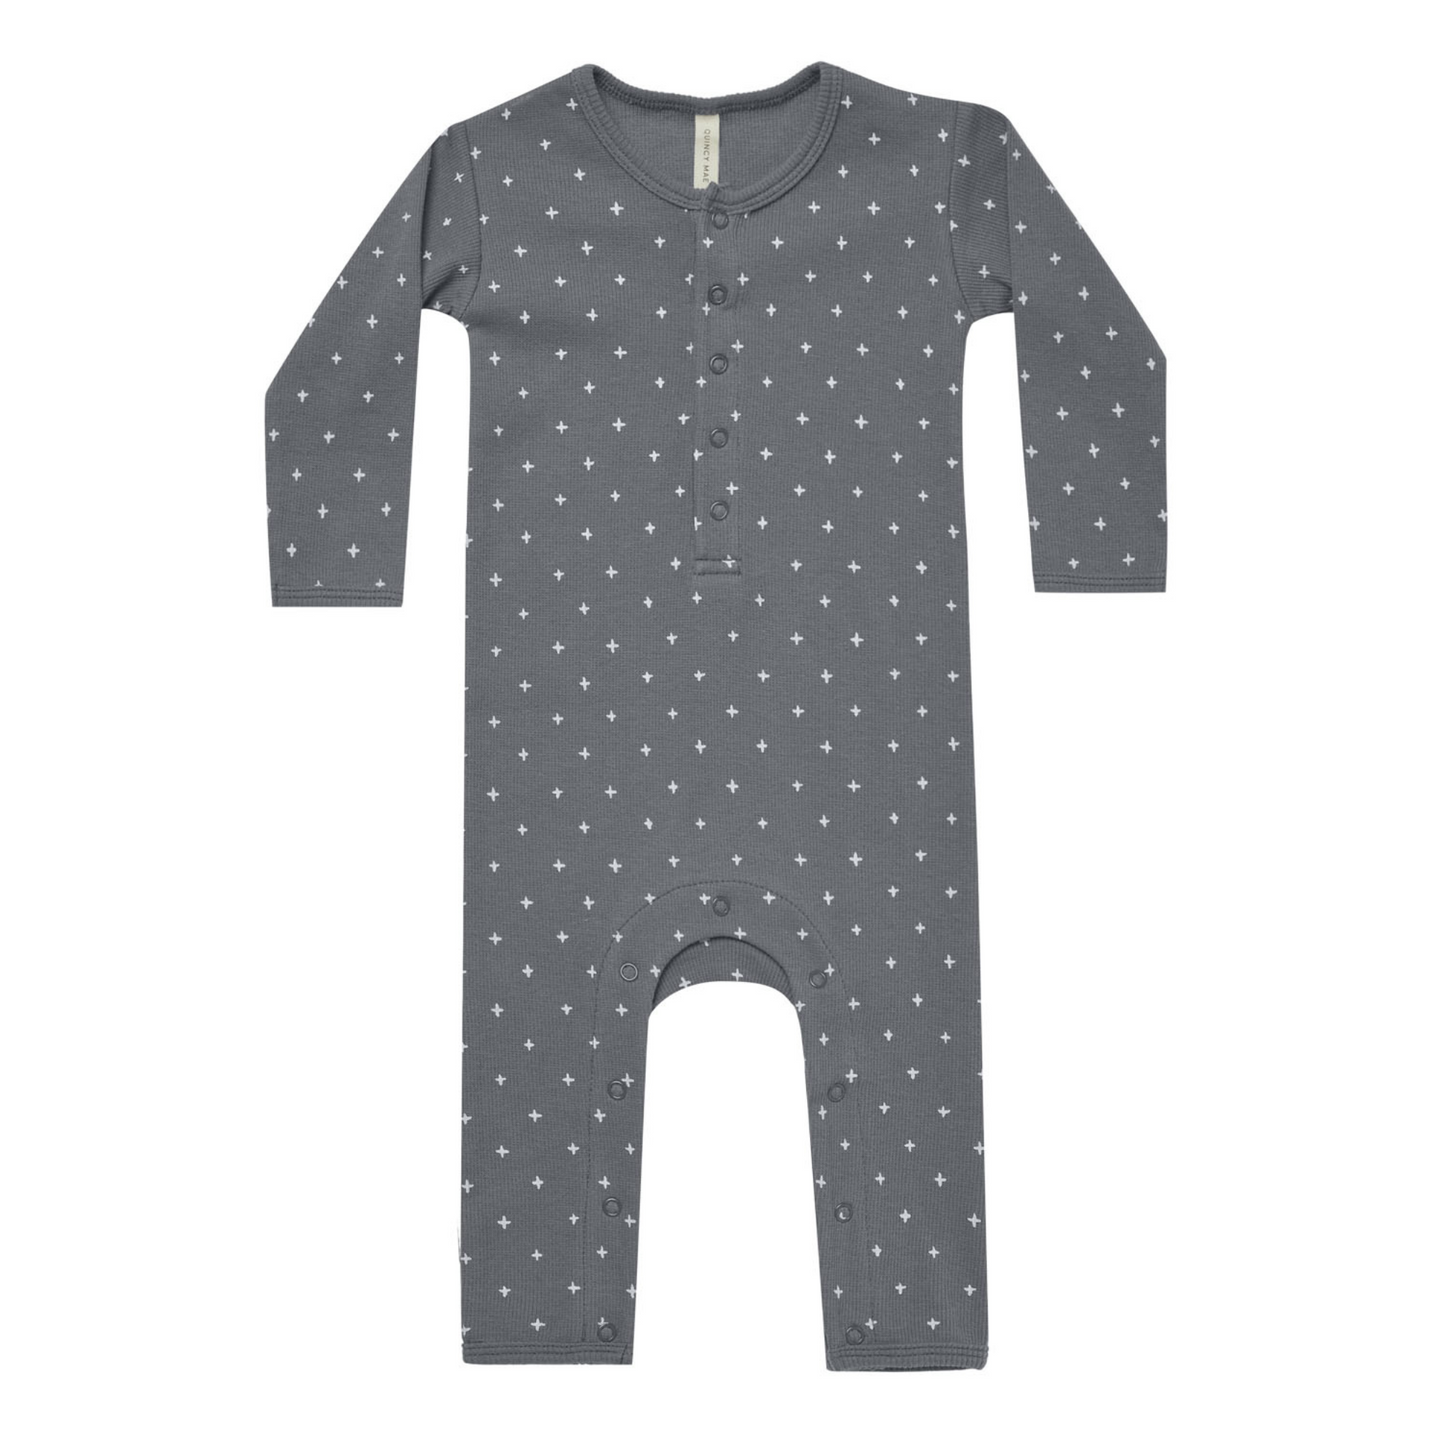 Ribbed Baby Jumpsuit, Criss Cross Navy